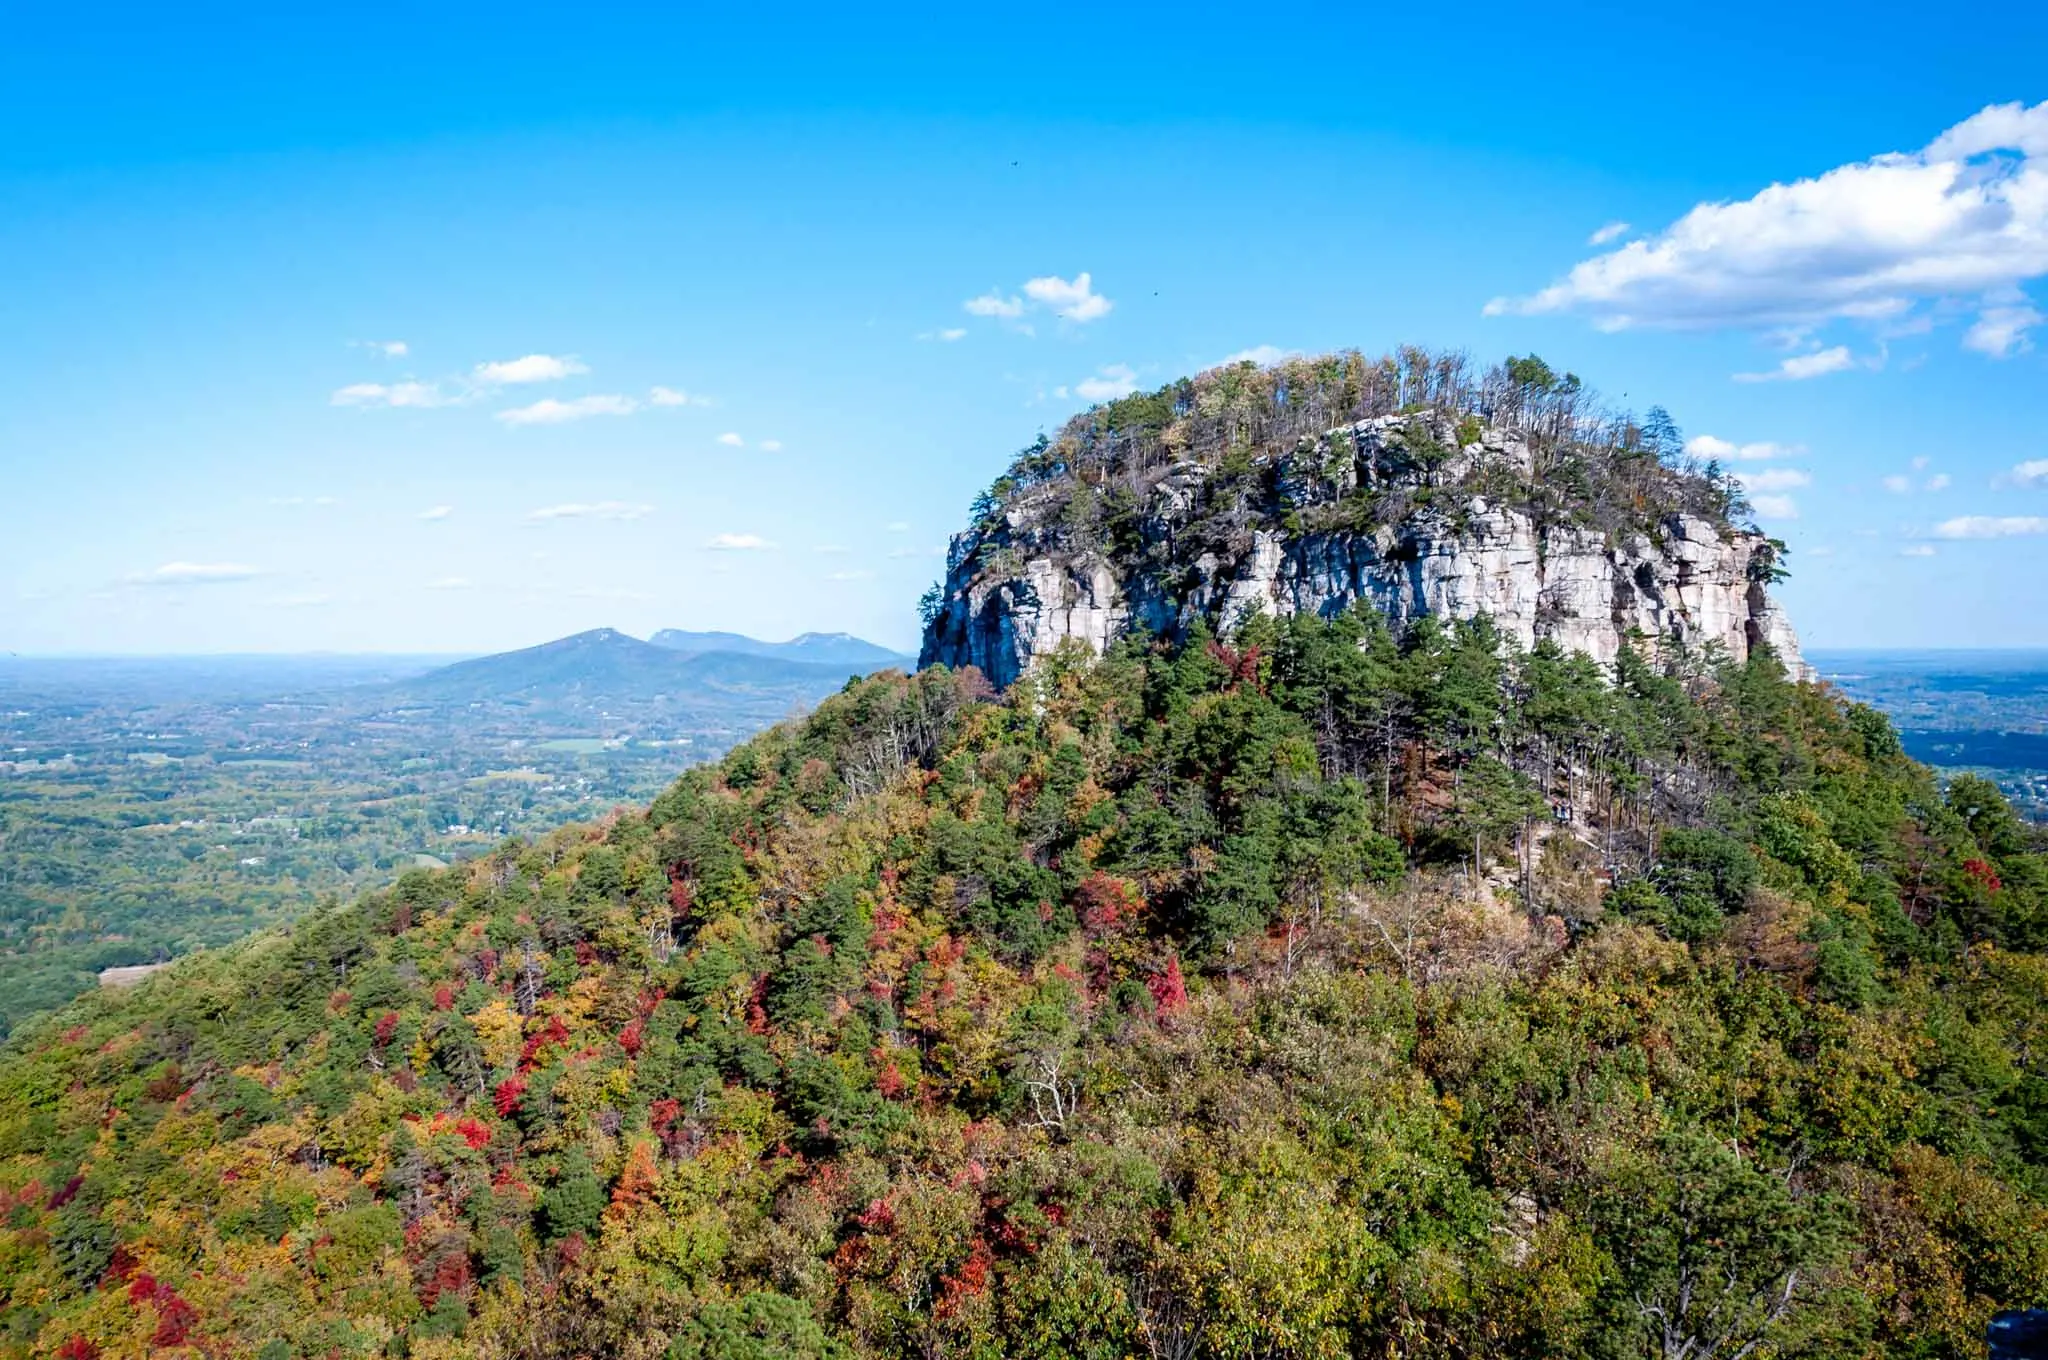 Top of a mountain with white rock peaking through and covered with trees with multicolored leaves